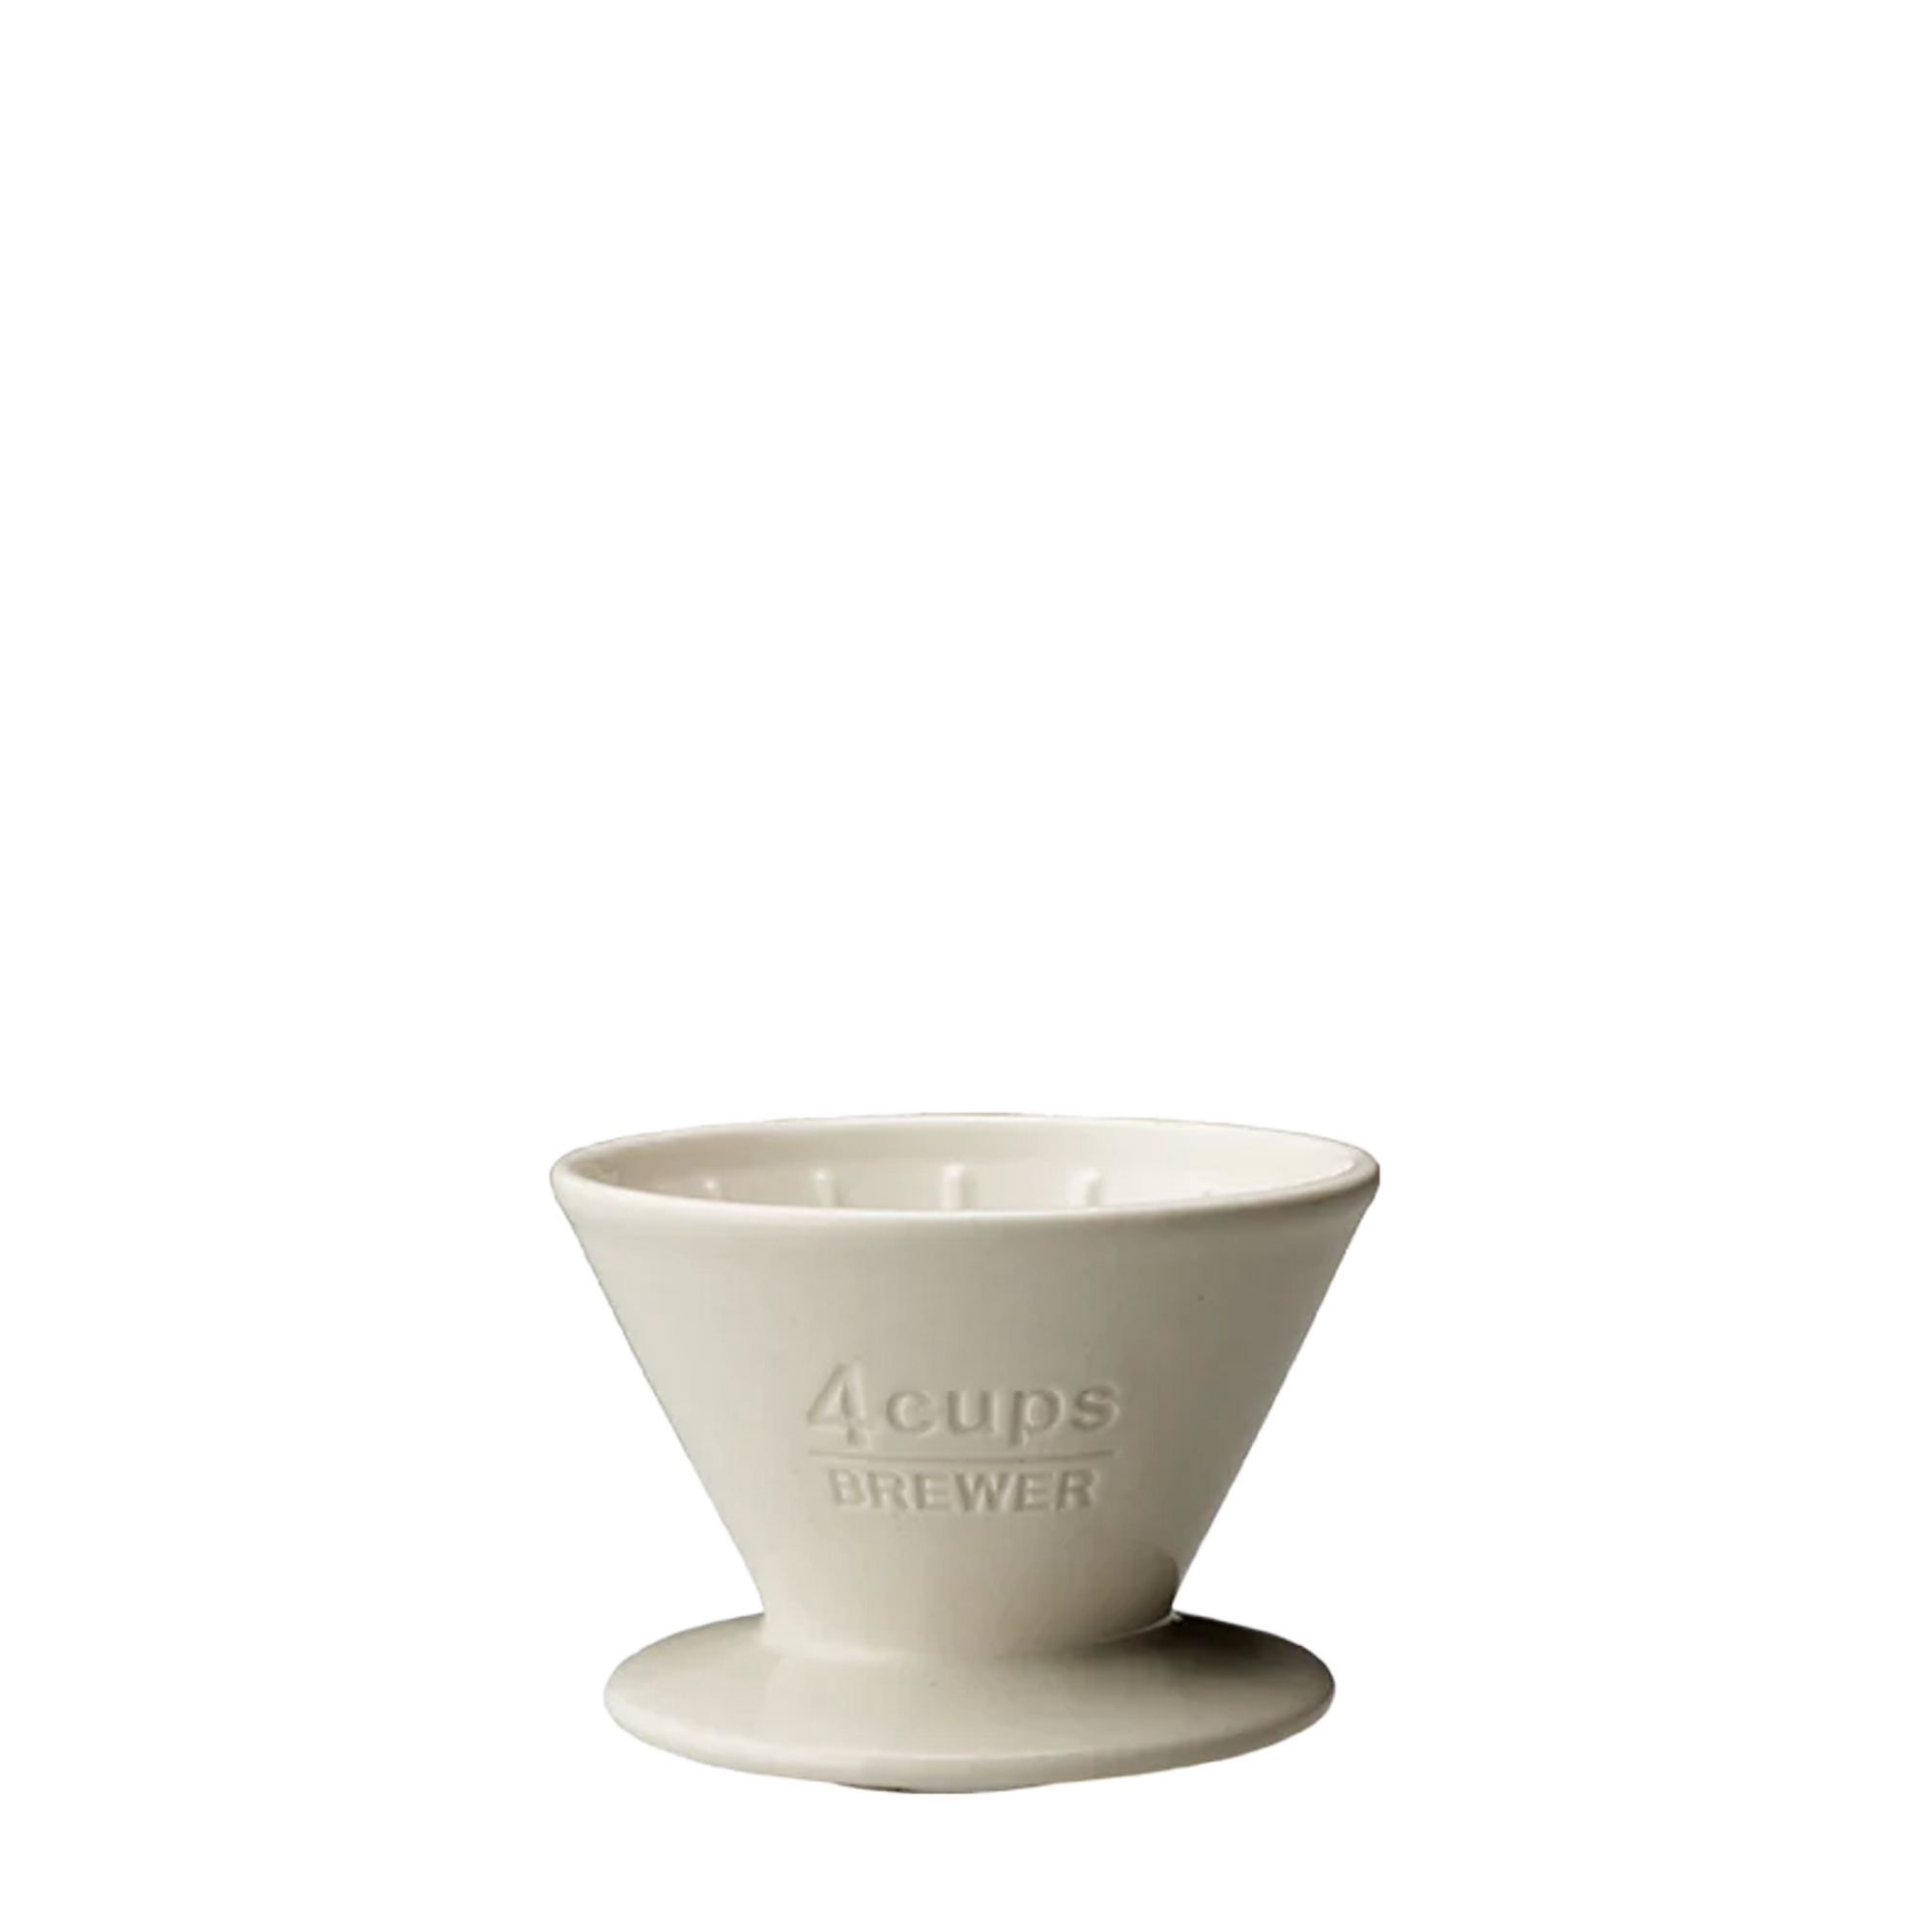 Slow Coffee Style brewer 4 cups porcelain white - Kinto